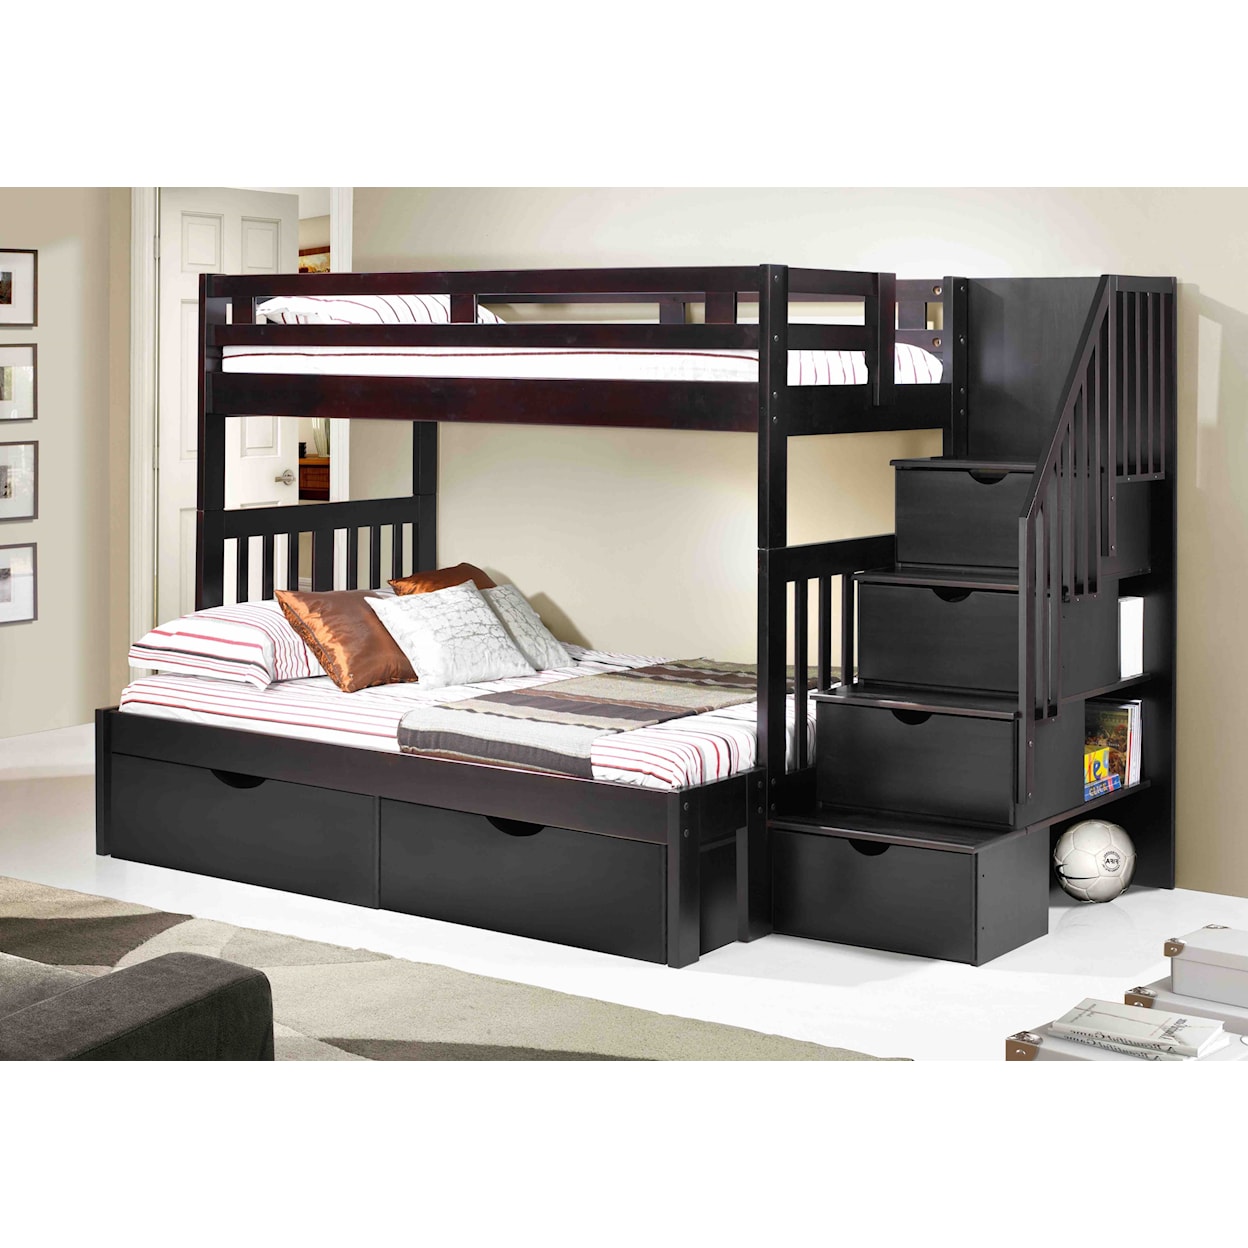 Innovations NAPLES Naples Twin over Full Bunk Bed with Stairs